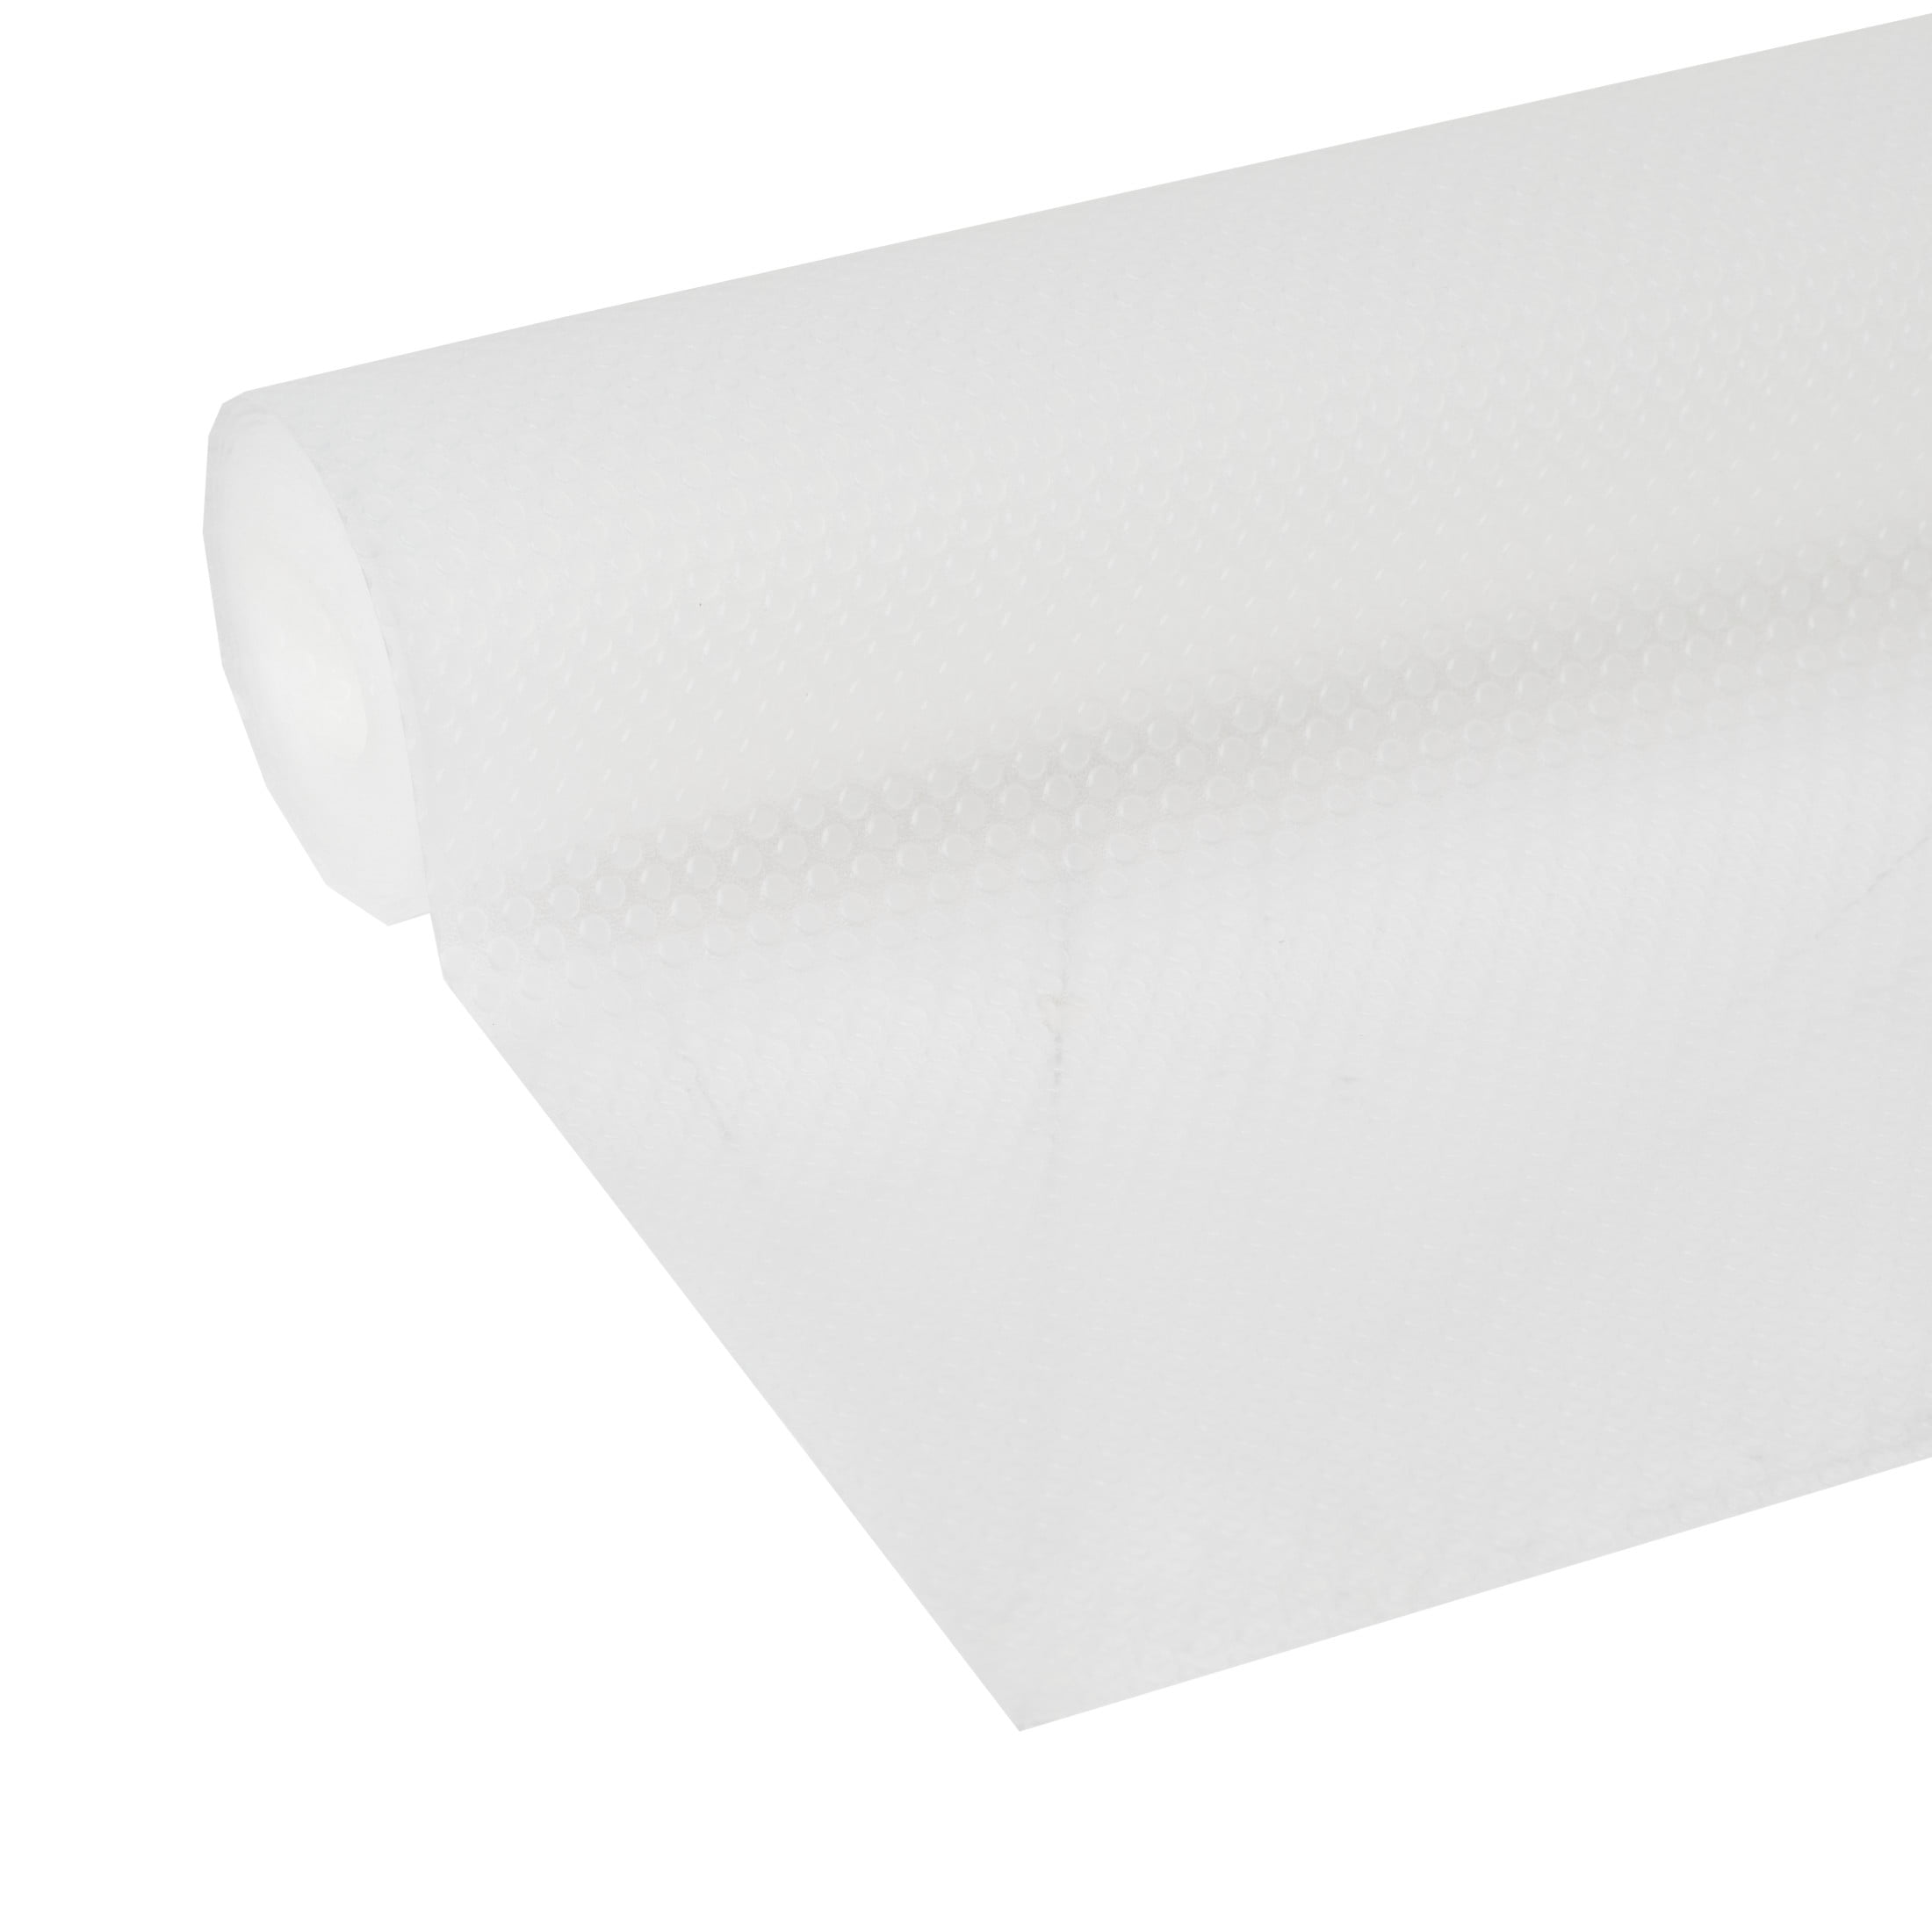 Drawer and Shelf Liner, Non Adhesive Roll, 20 Inch x 10 FT